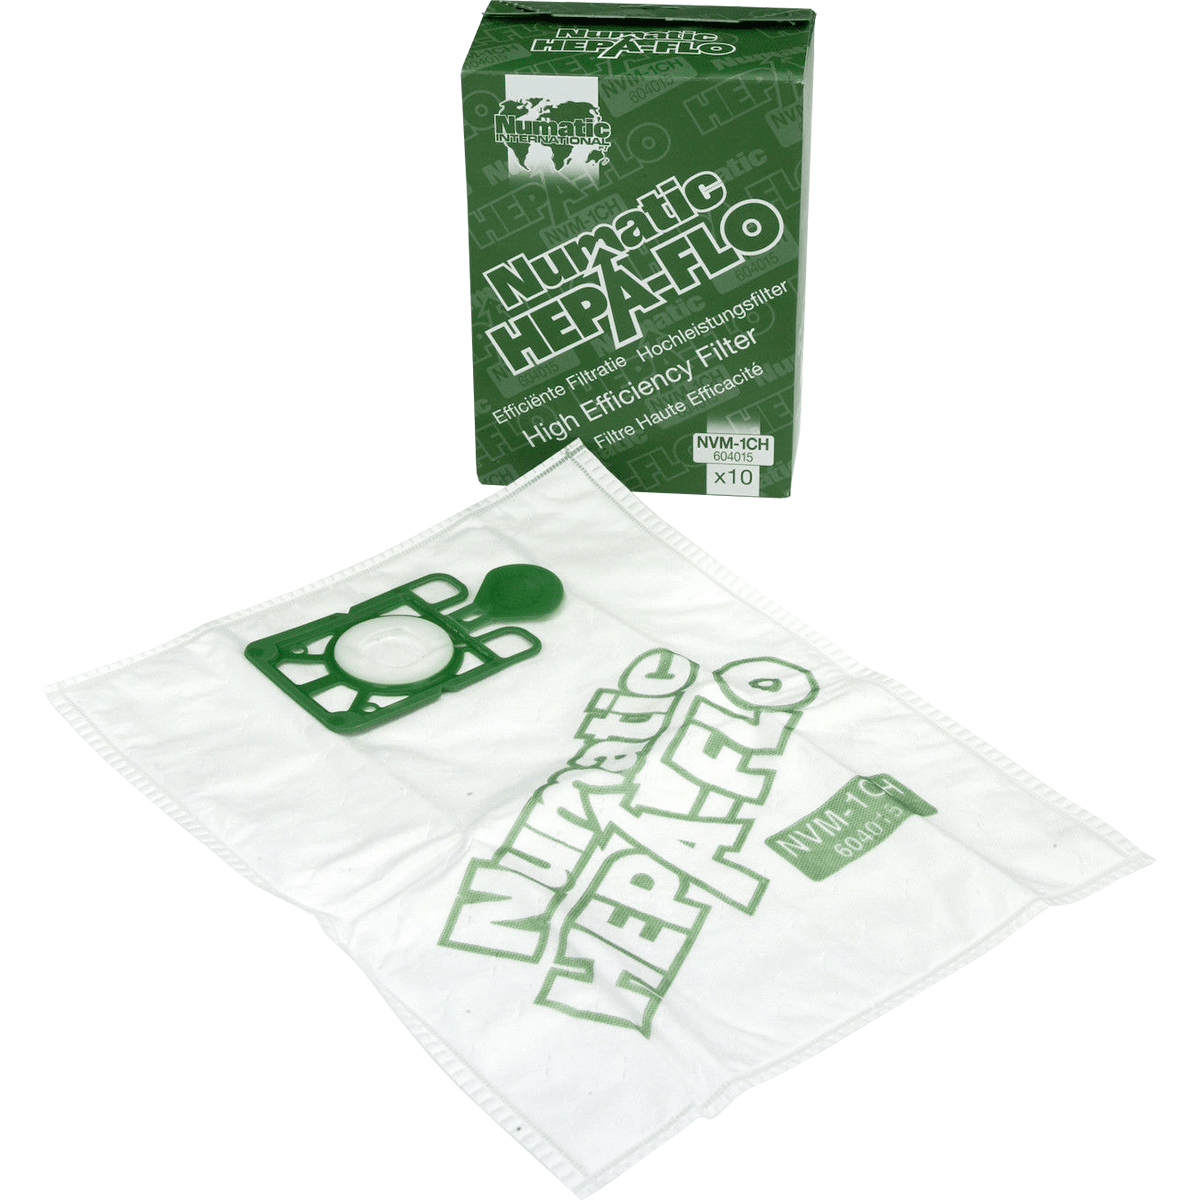 NaceCare HEPA Flo filter bags for NVM 240/290 10-Pack